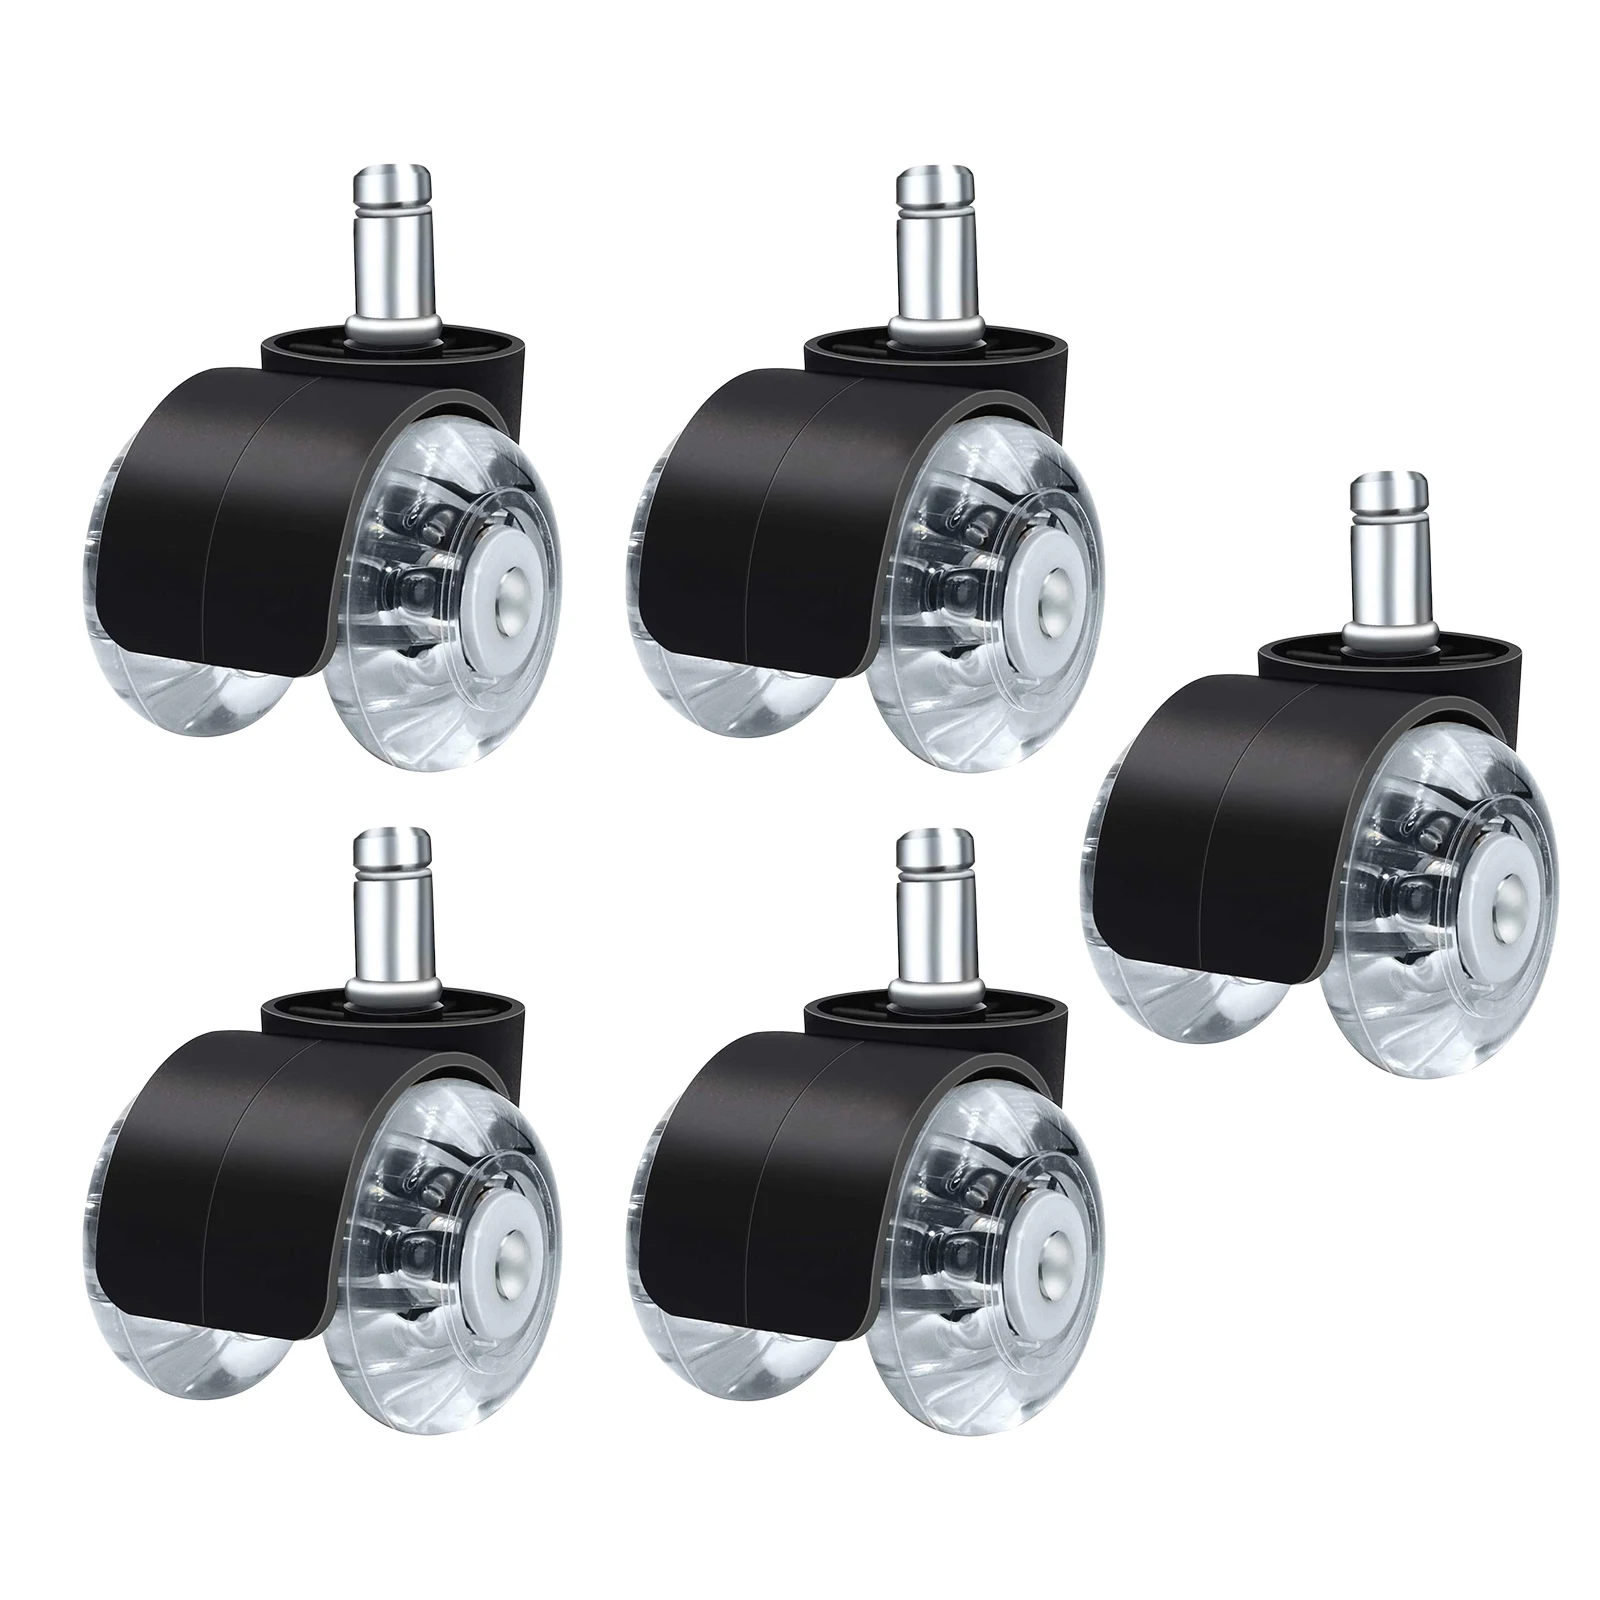 5 Pcs Replacement Heavy Duty Computer Swivel Office Chair Caster Wheels Set Floor Rollers Furniture Accessories